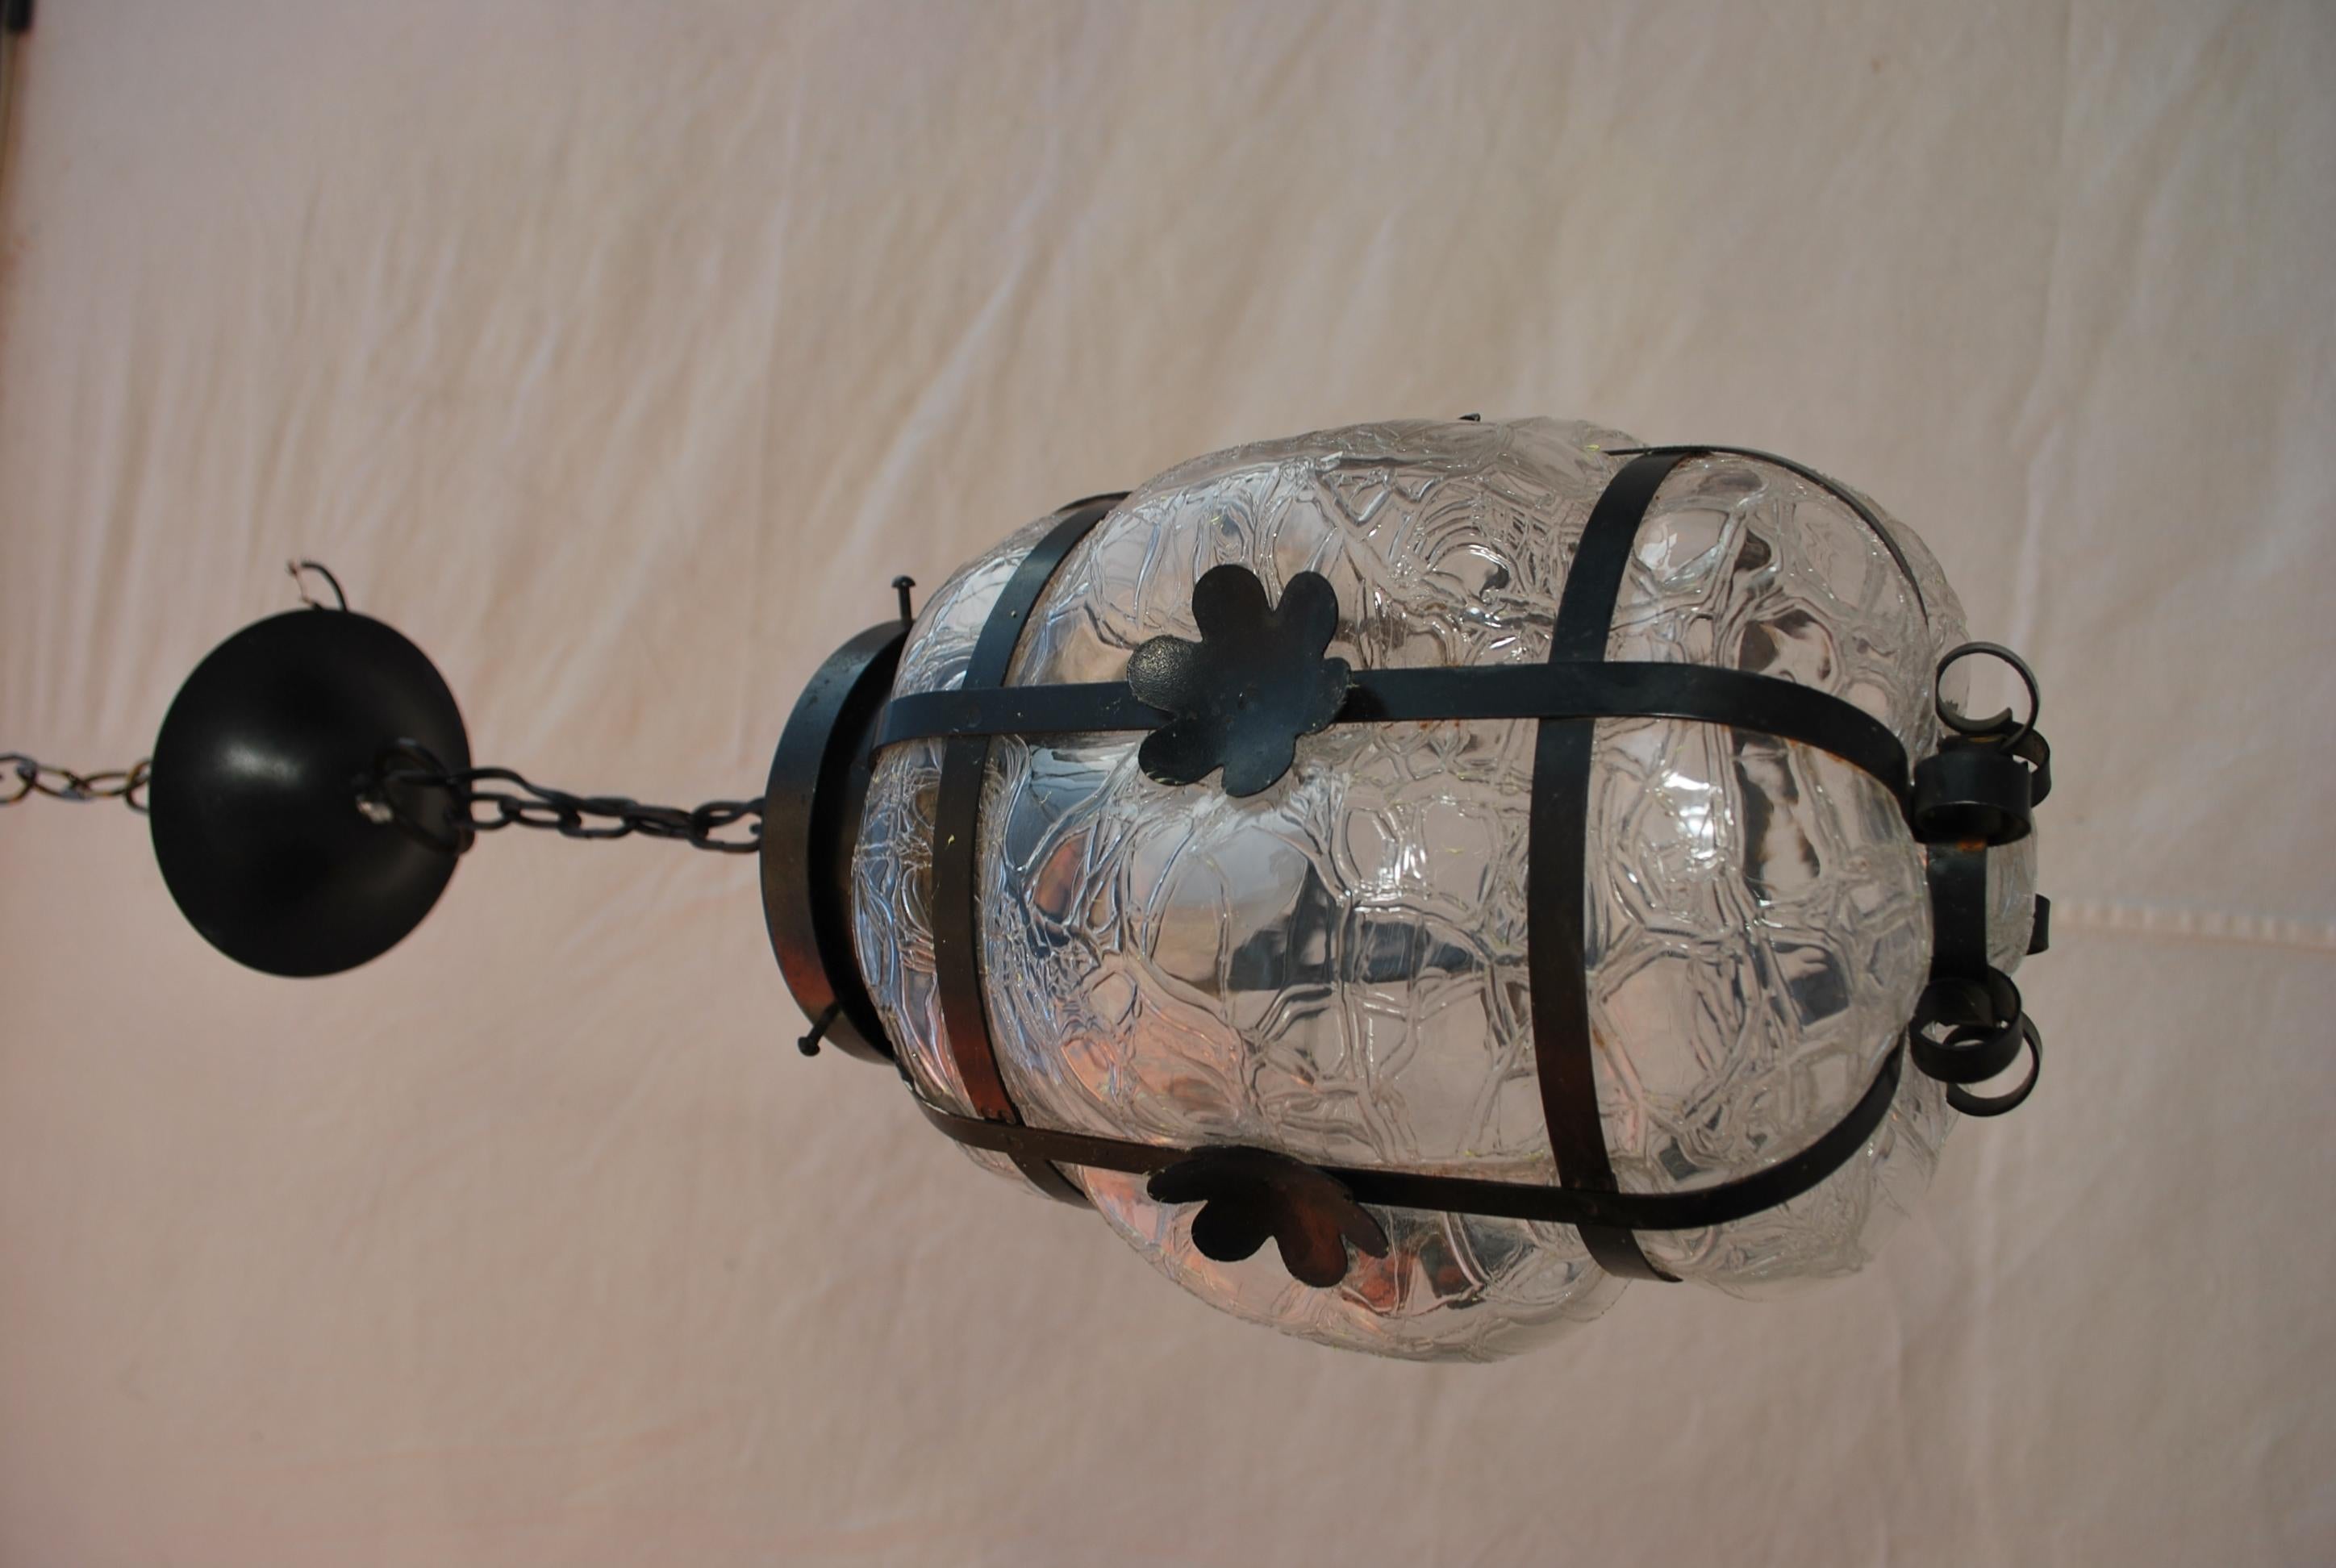 A beautiful hands blown glass ( possibly Murano ) light, the glass was blown into the iron frame, the dimensions are with out counting the chain.